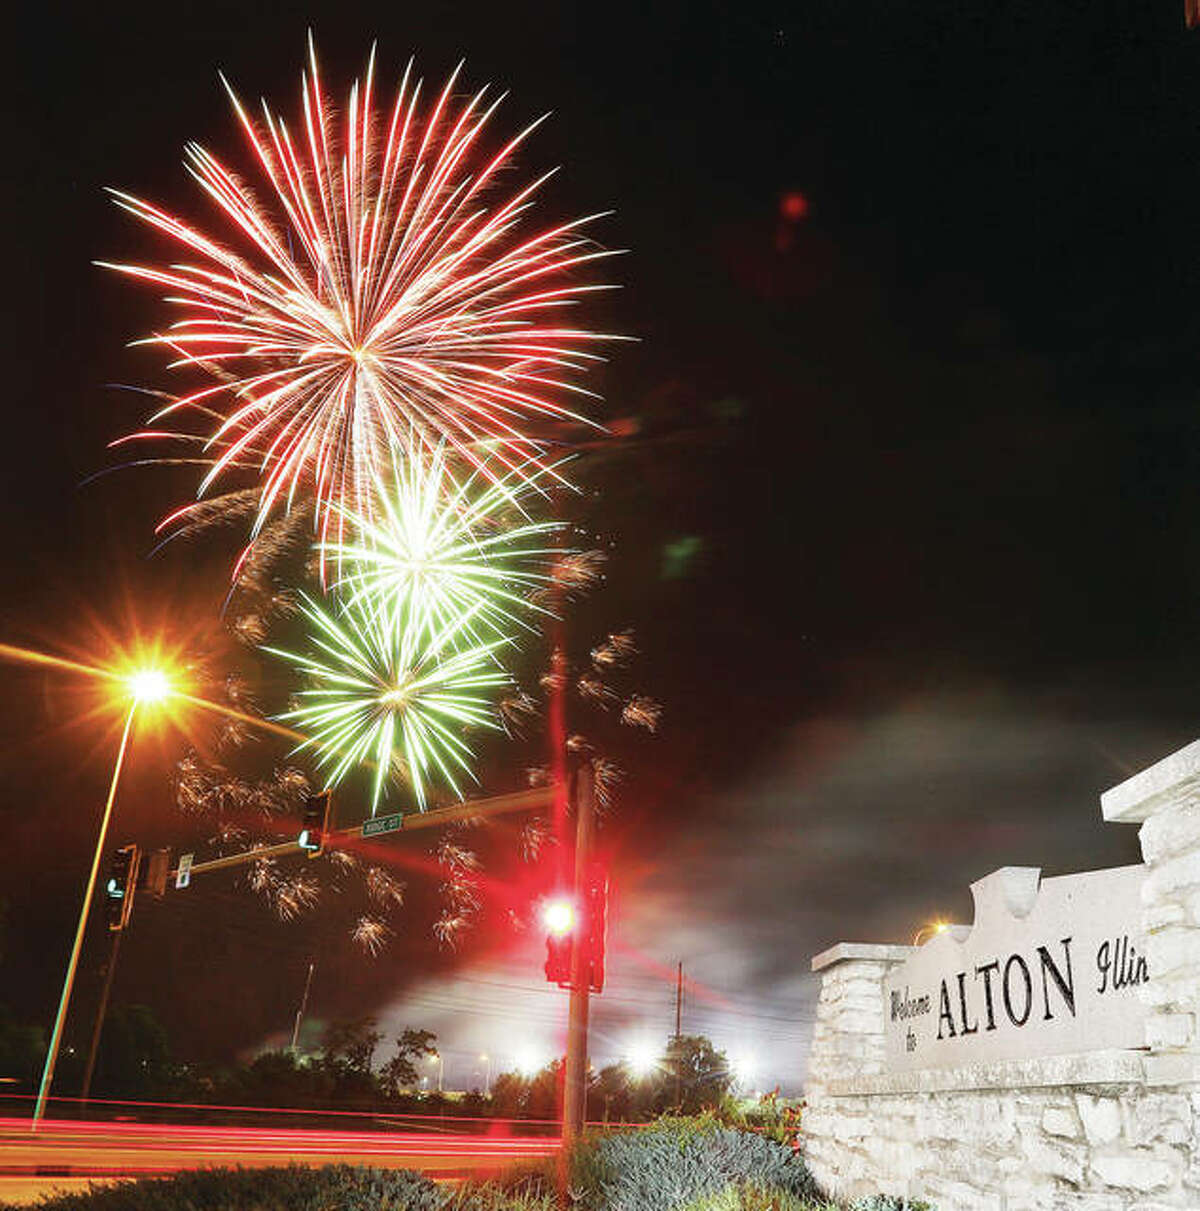 The Great Rivers & Routes Tourism Bureau of Southwest Illinois will hold its final Light Up the River Road fireworks event starting at 8:30 p.m. Thursday with simultaneous shows in Alton and Grafton.